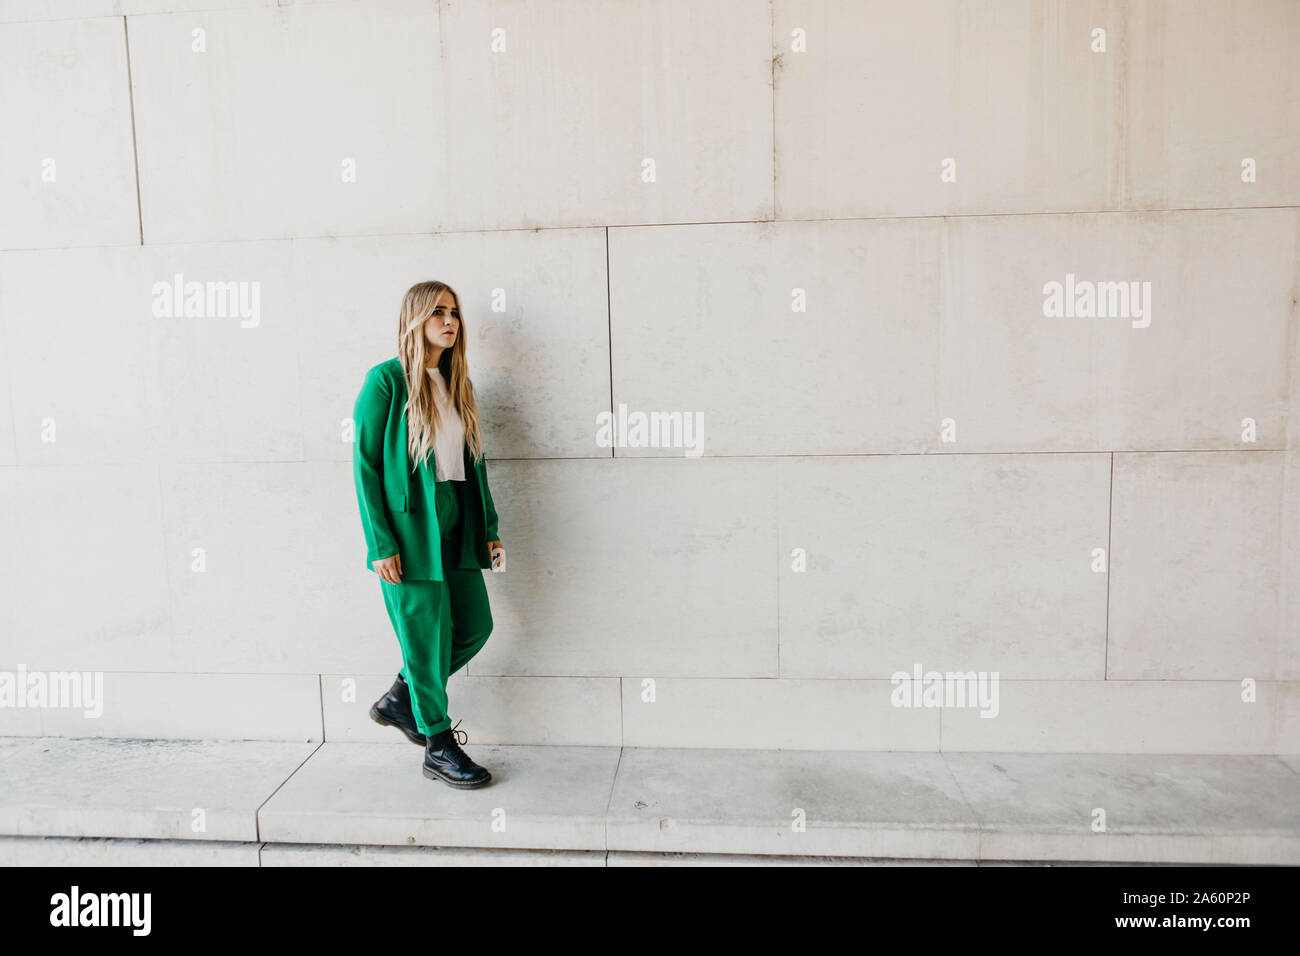 Blond young woman wearing green pantsuit outdoors Stock Photo